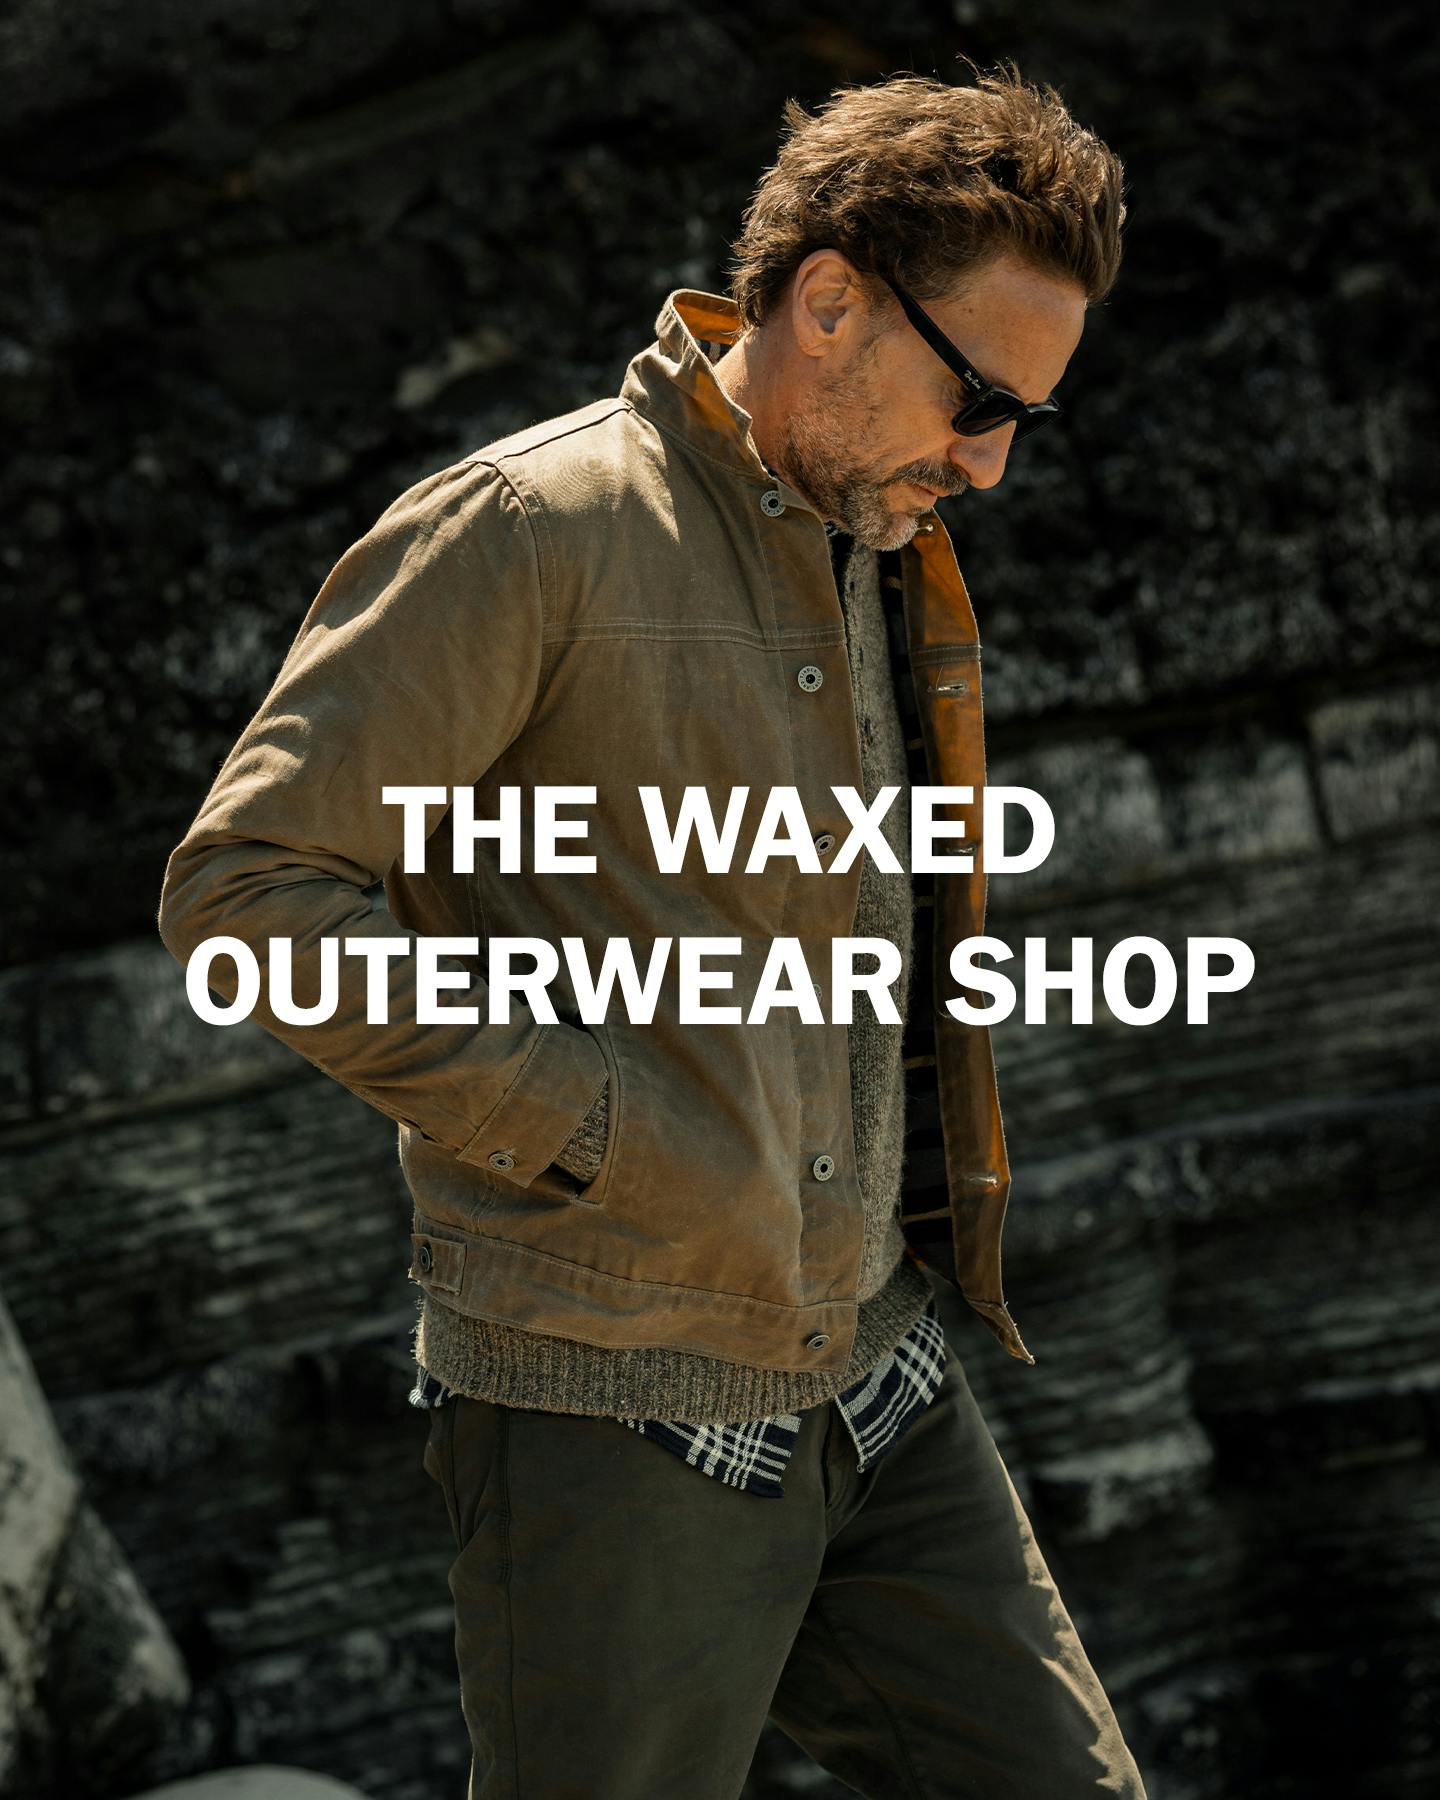 The Waxed Outerwear Shop